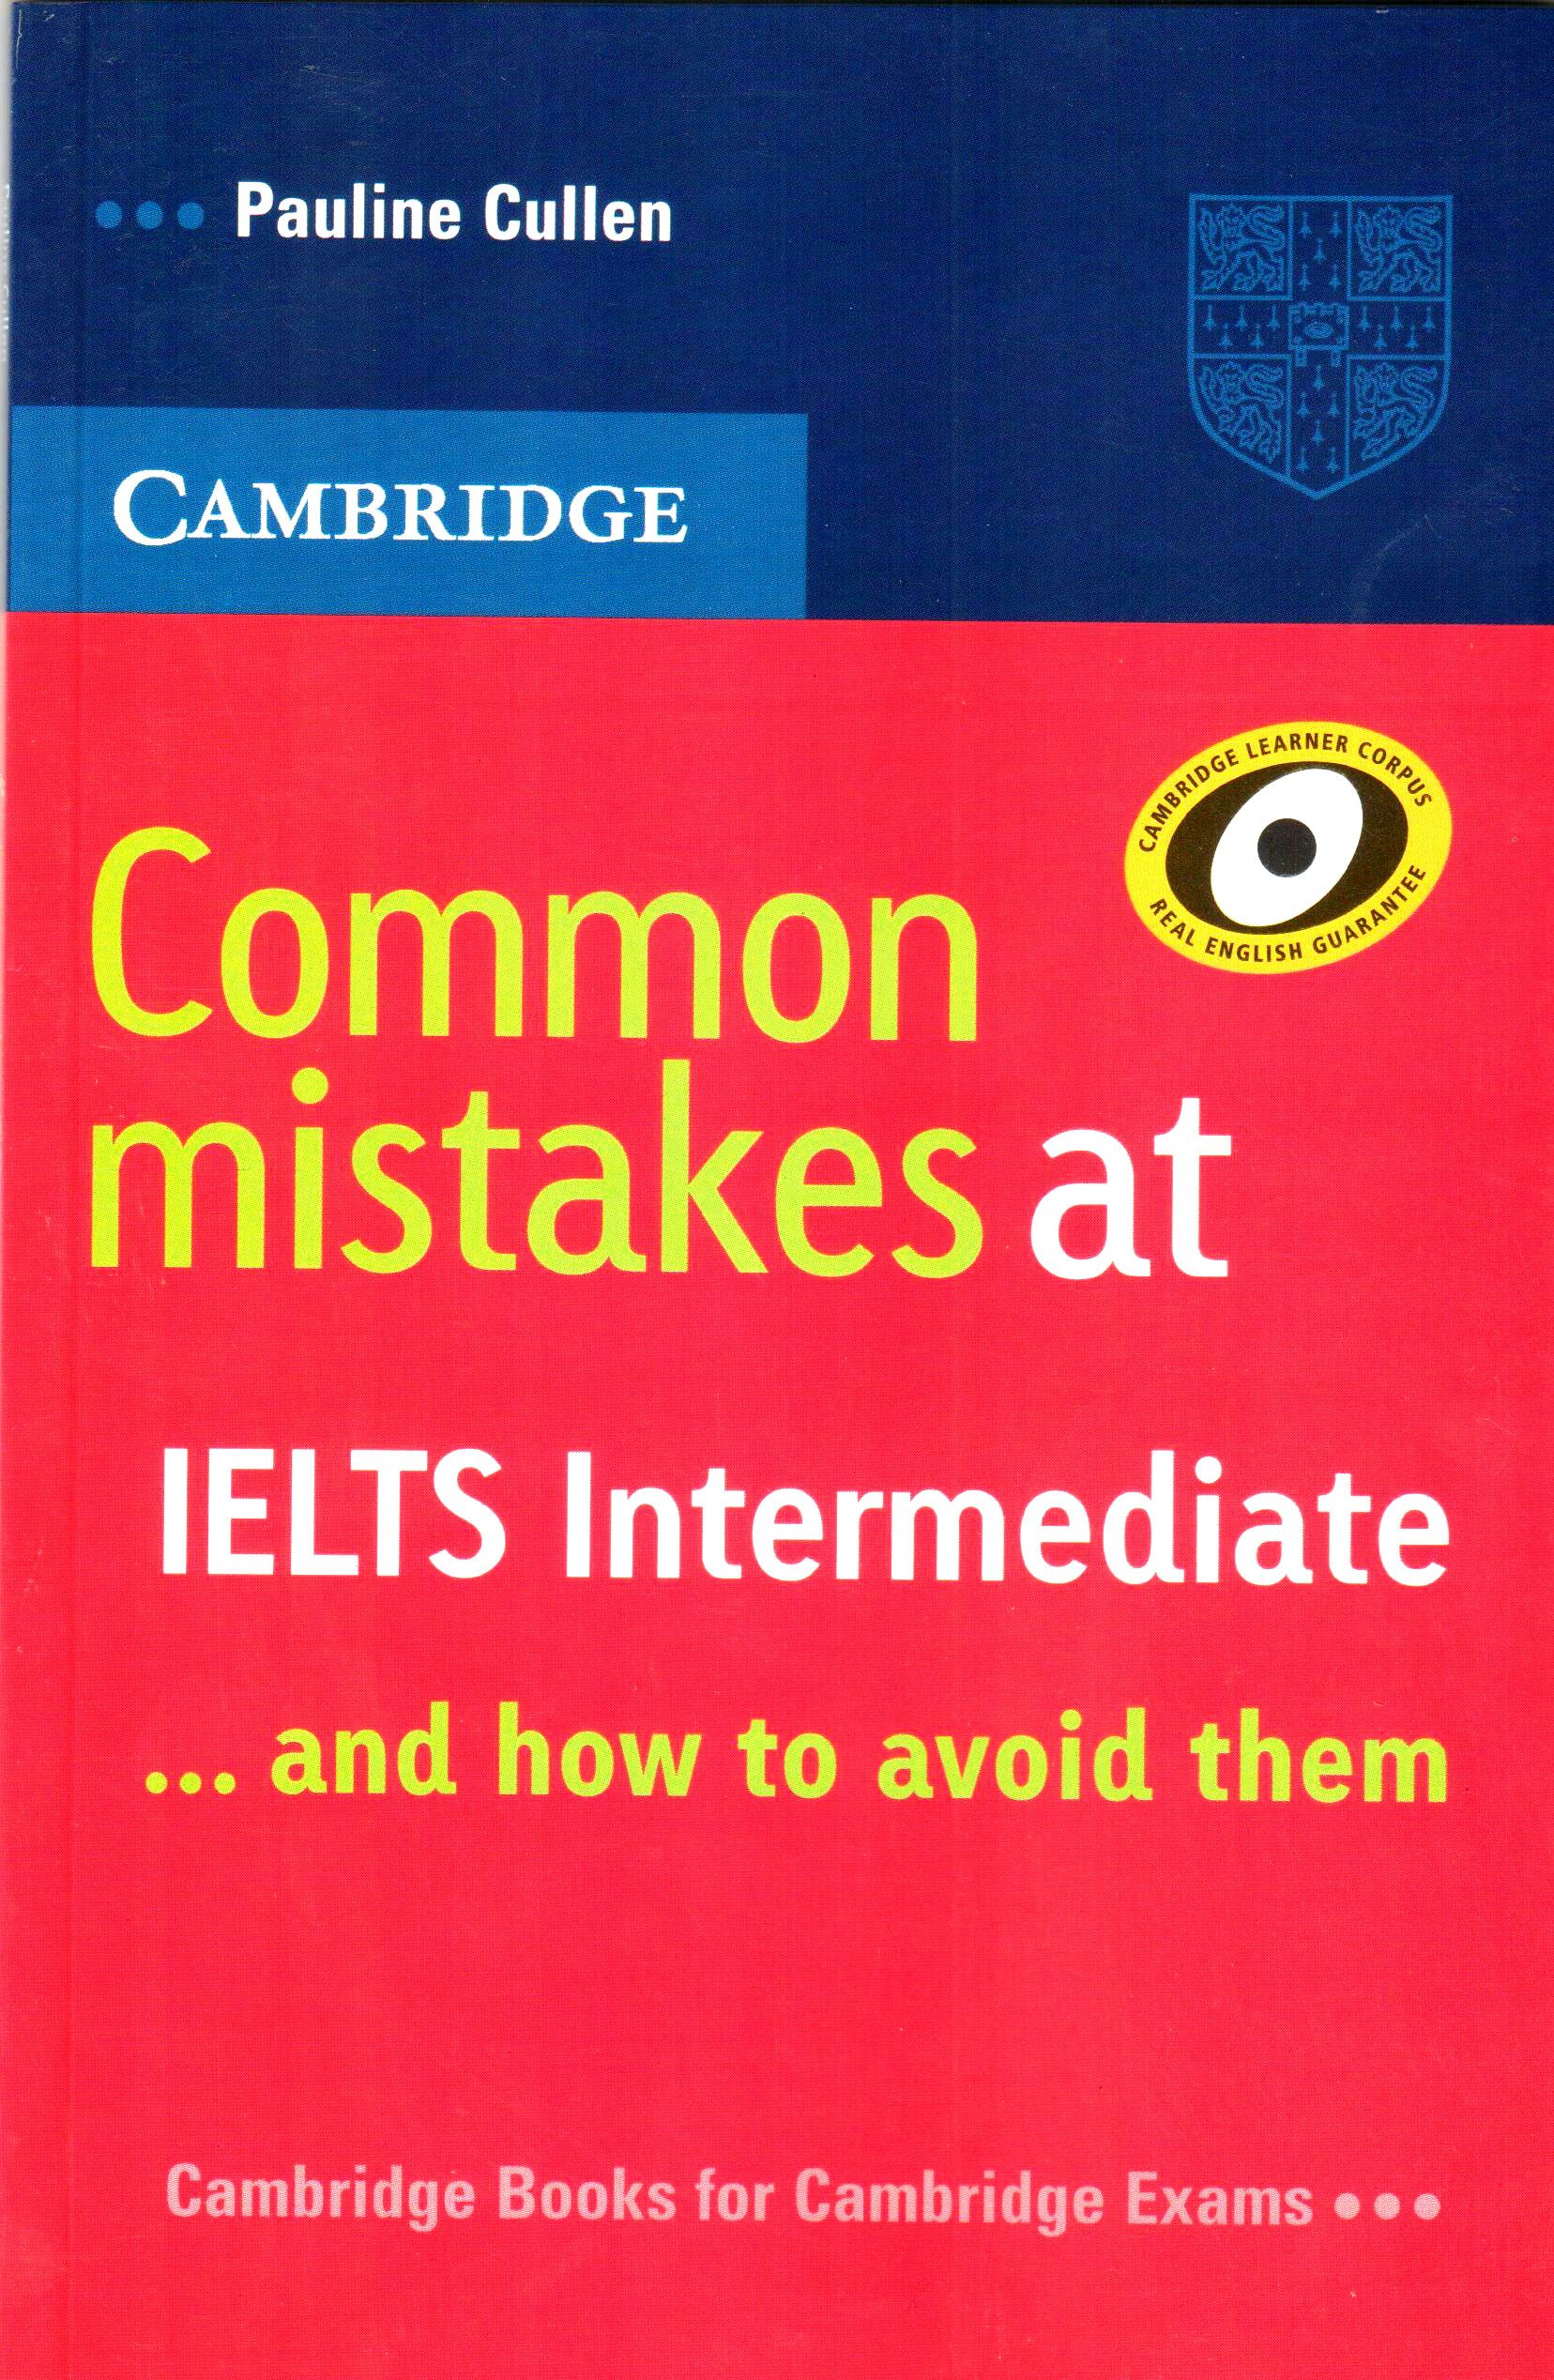 Free essays for ielts download